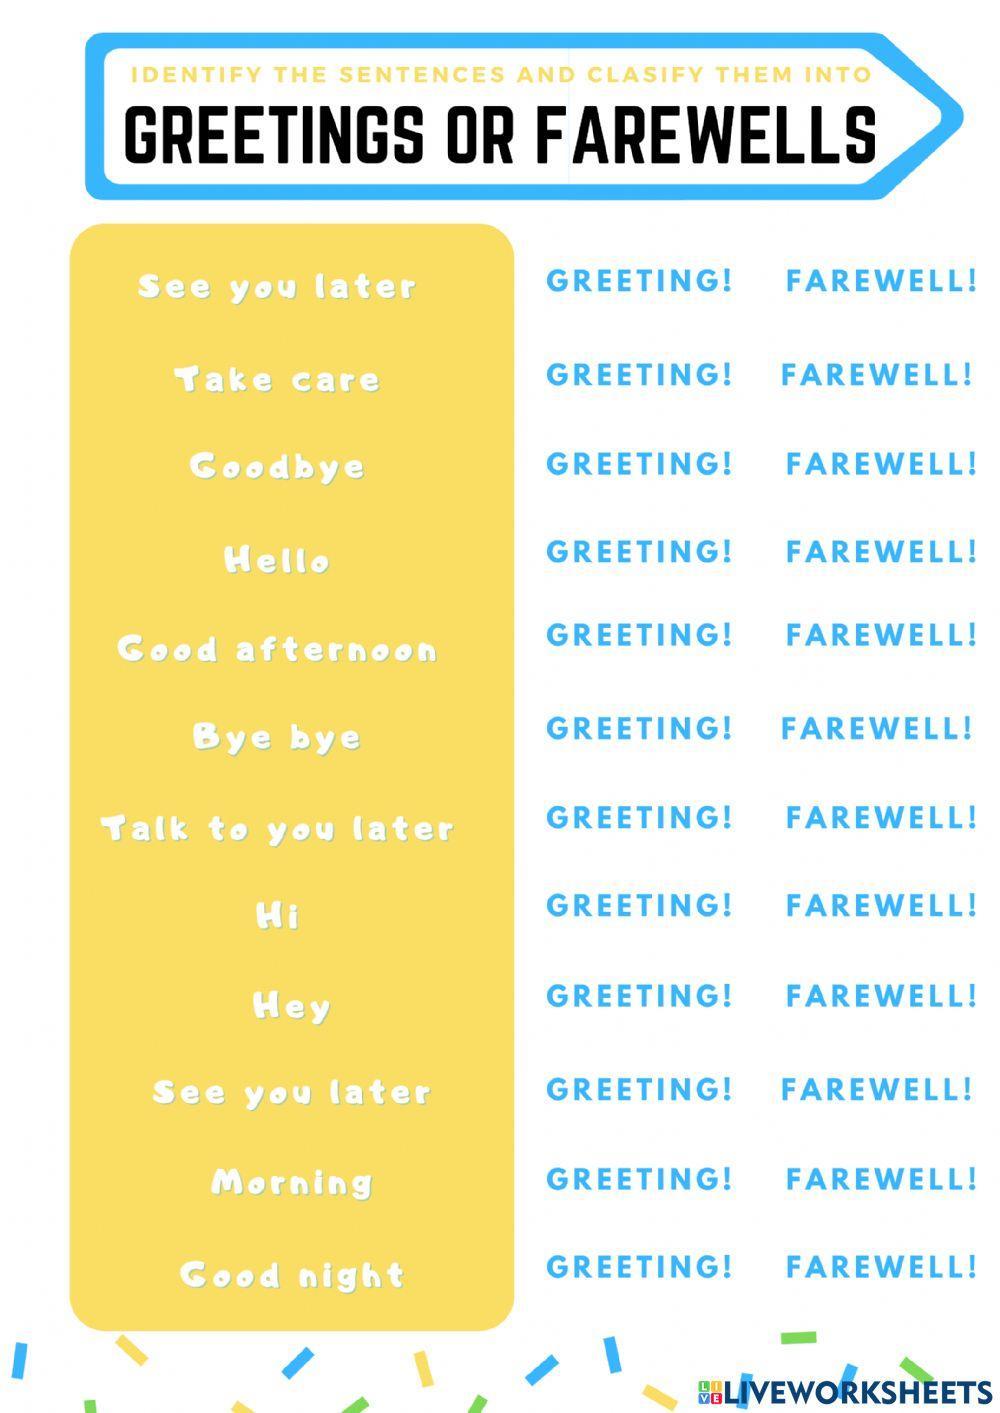 Greeting or farewell